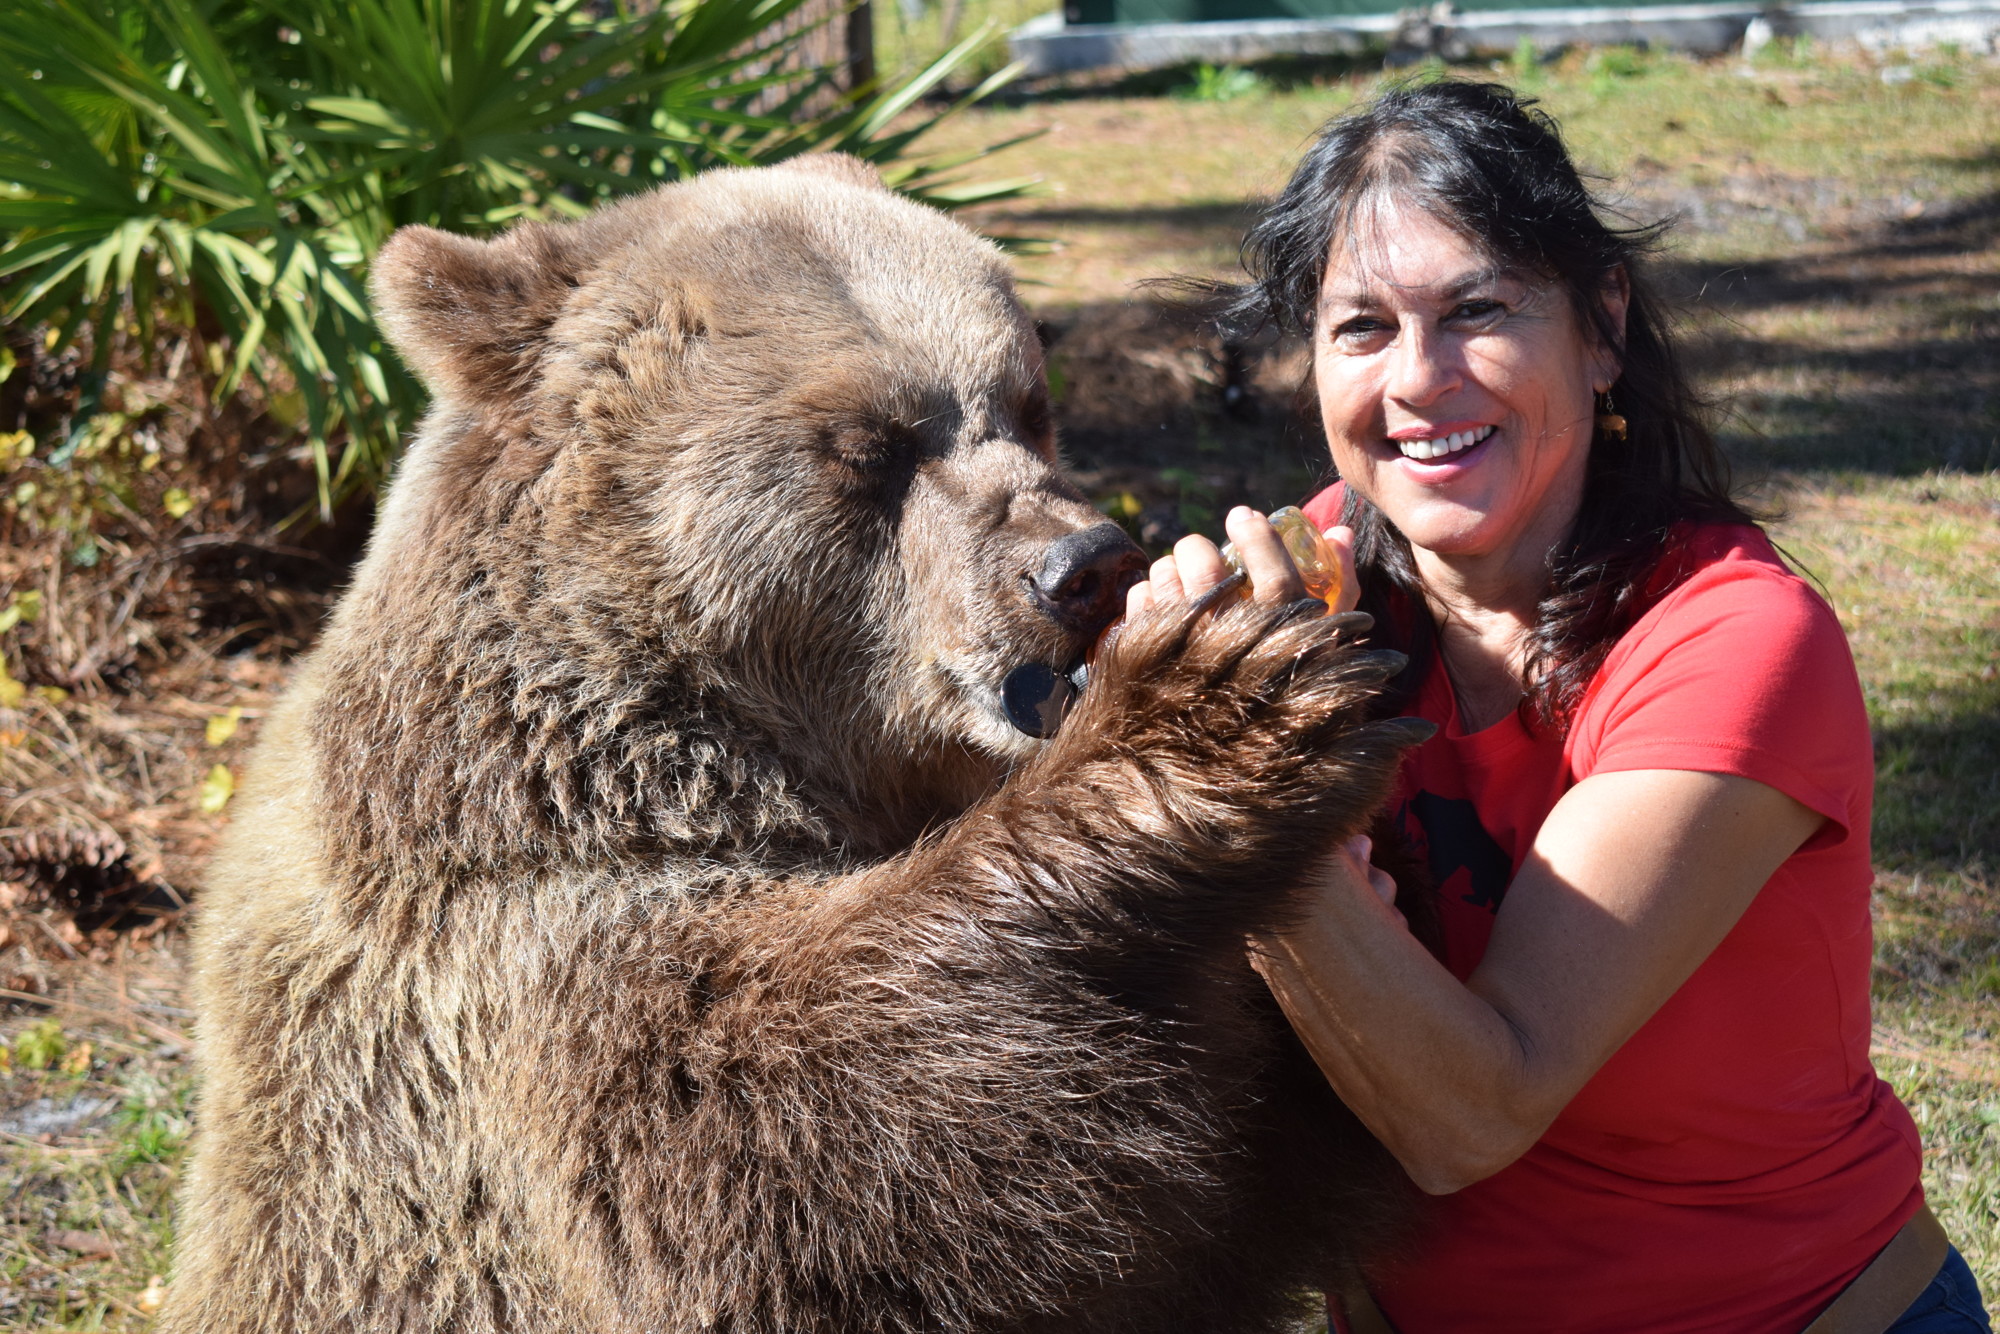 Bearadise Ranch owner Monica Welde works with Carol, one of the bears at the ranch. Bearadise Ranch will be open through July 4 and reopen in October.